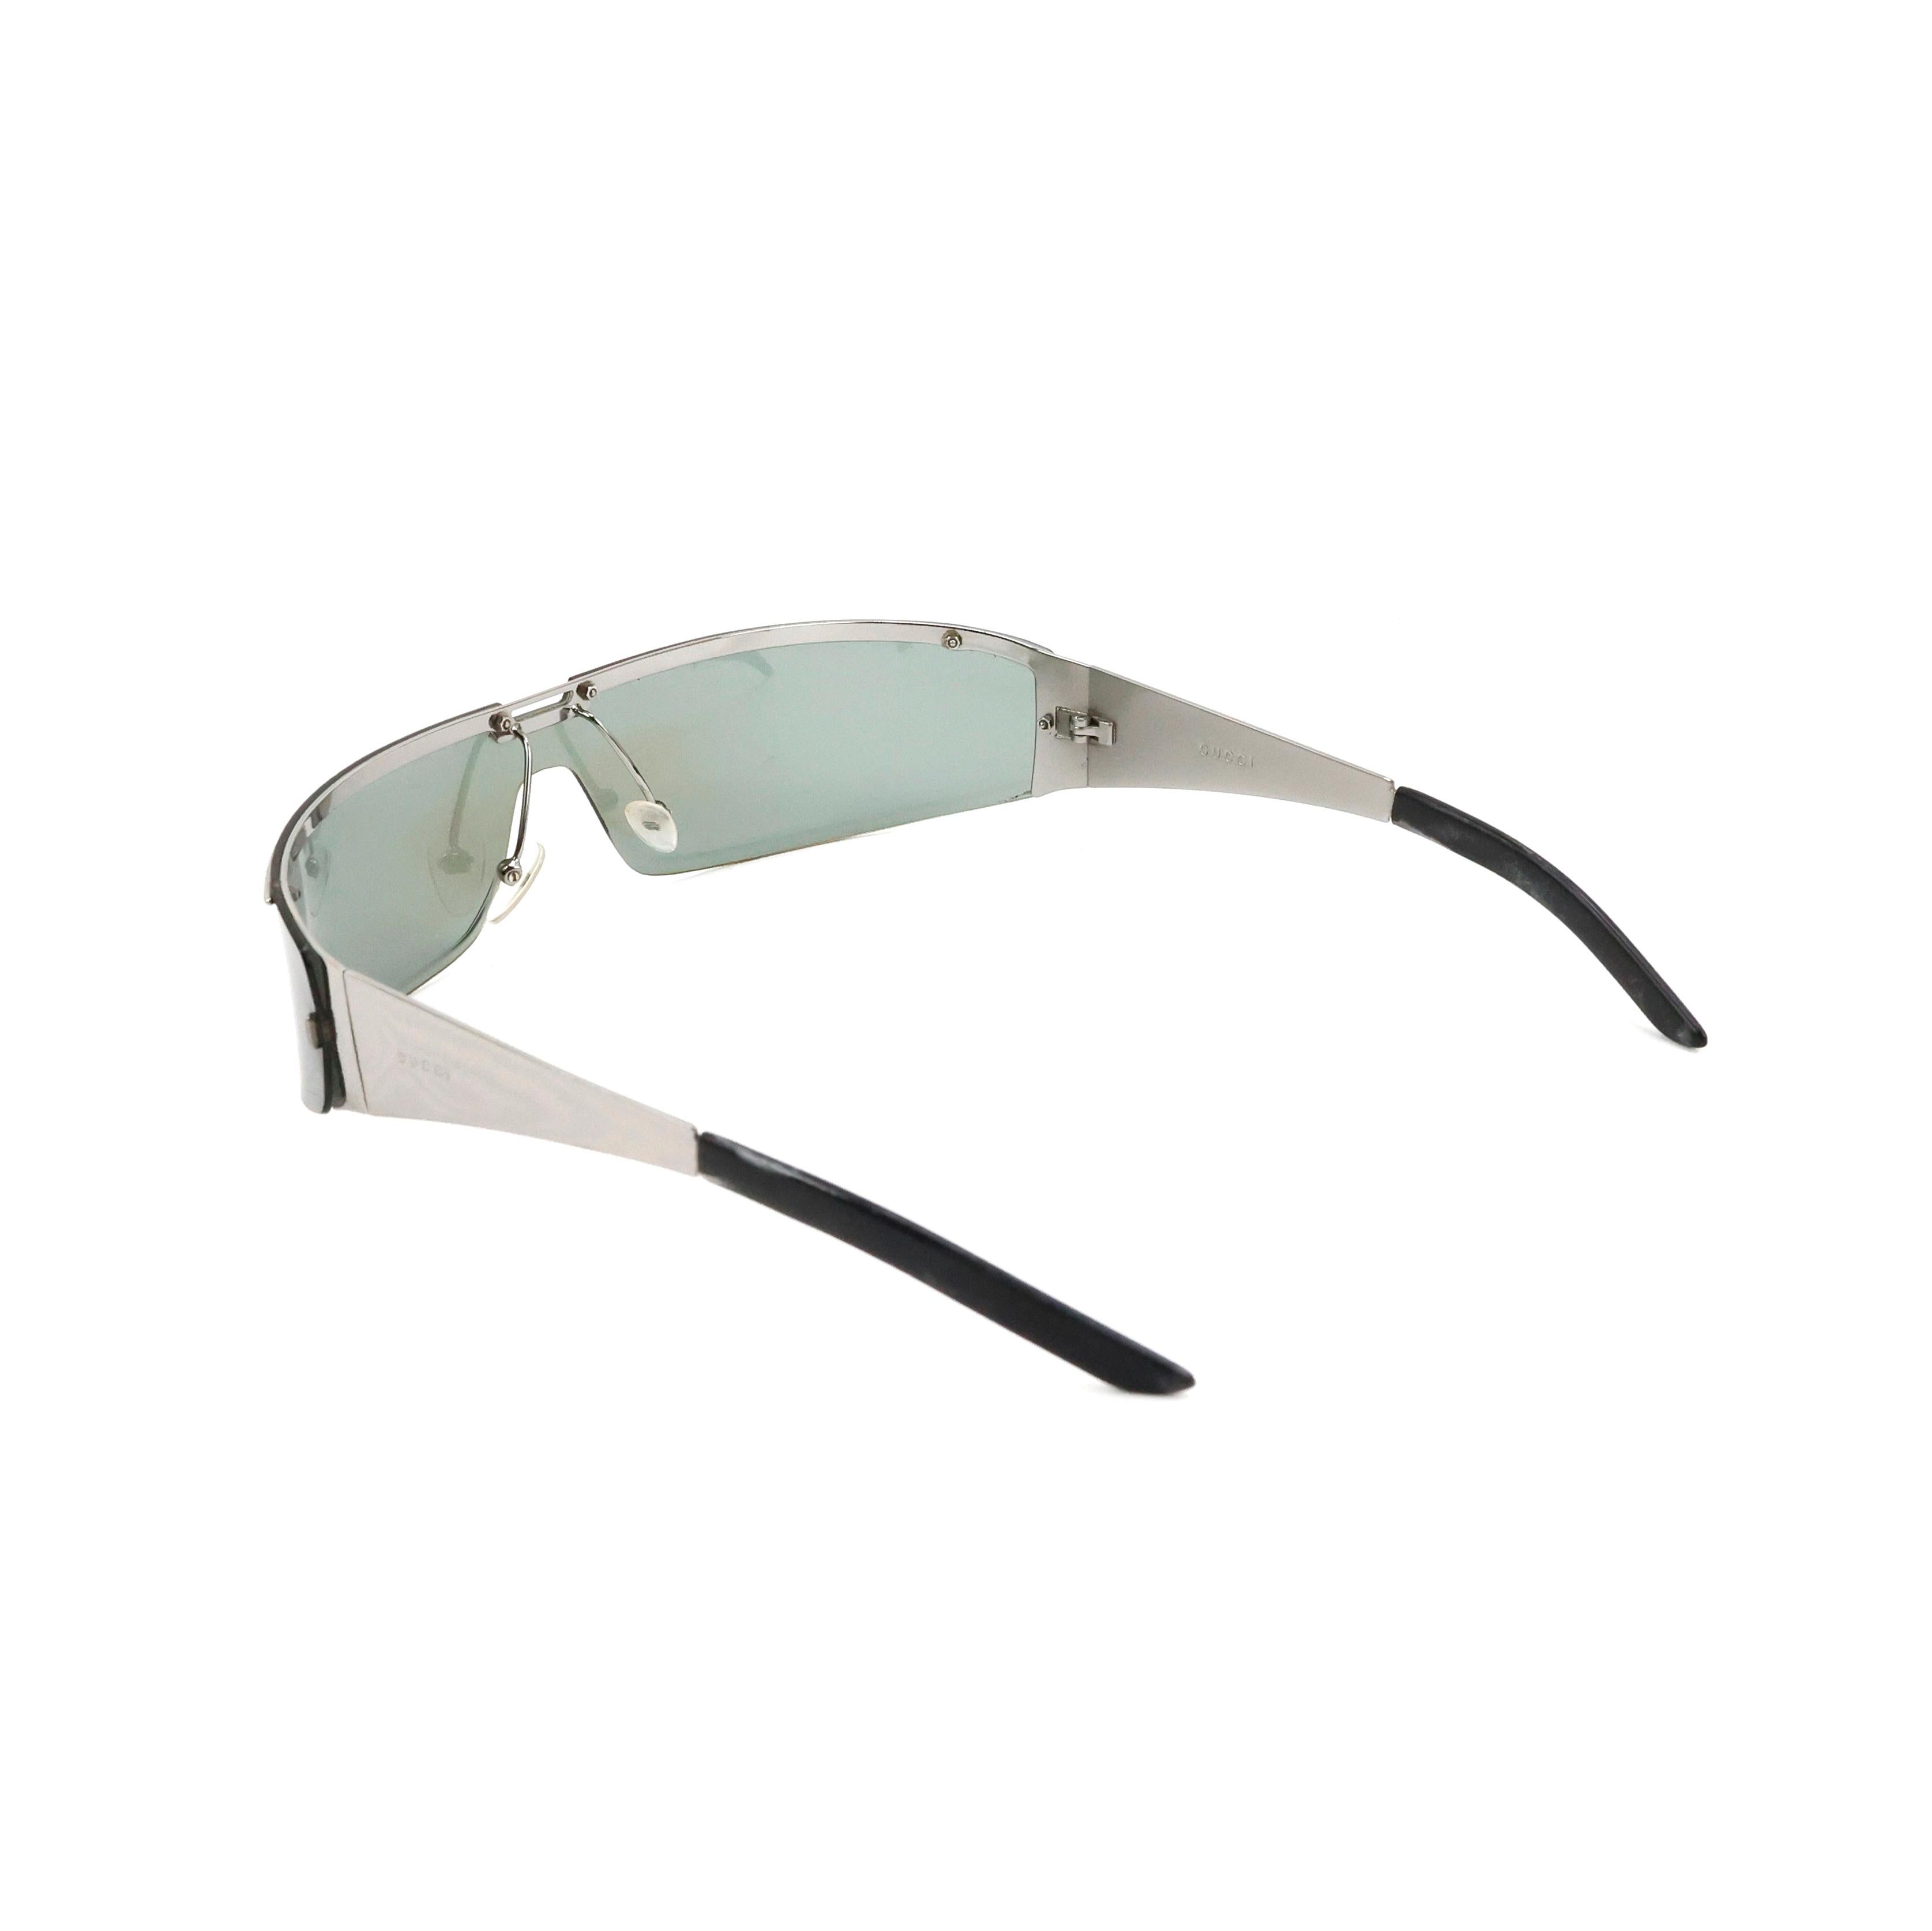 Gucci by Tom Ford Sonnenbrille im Angebot 3